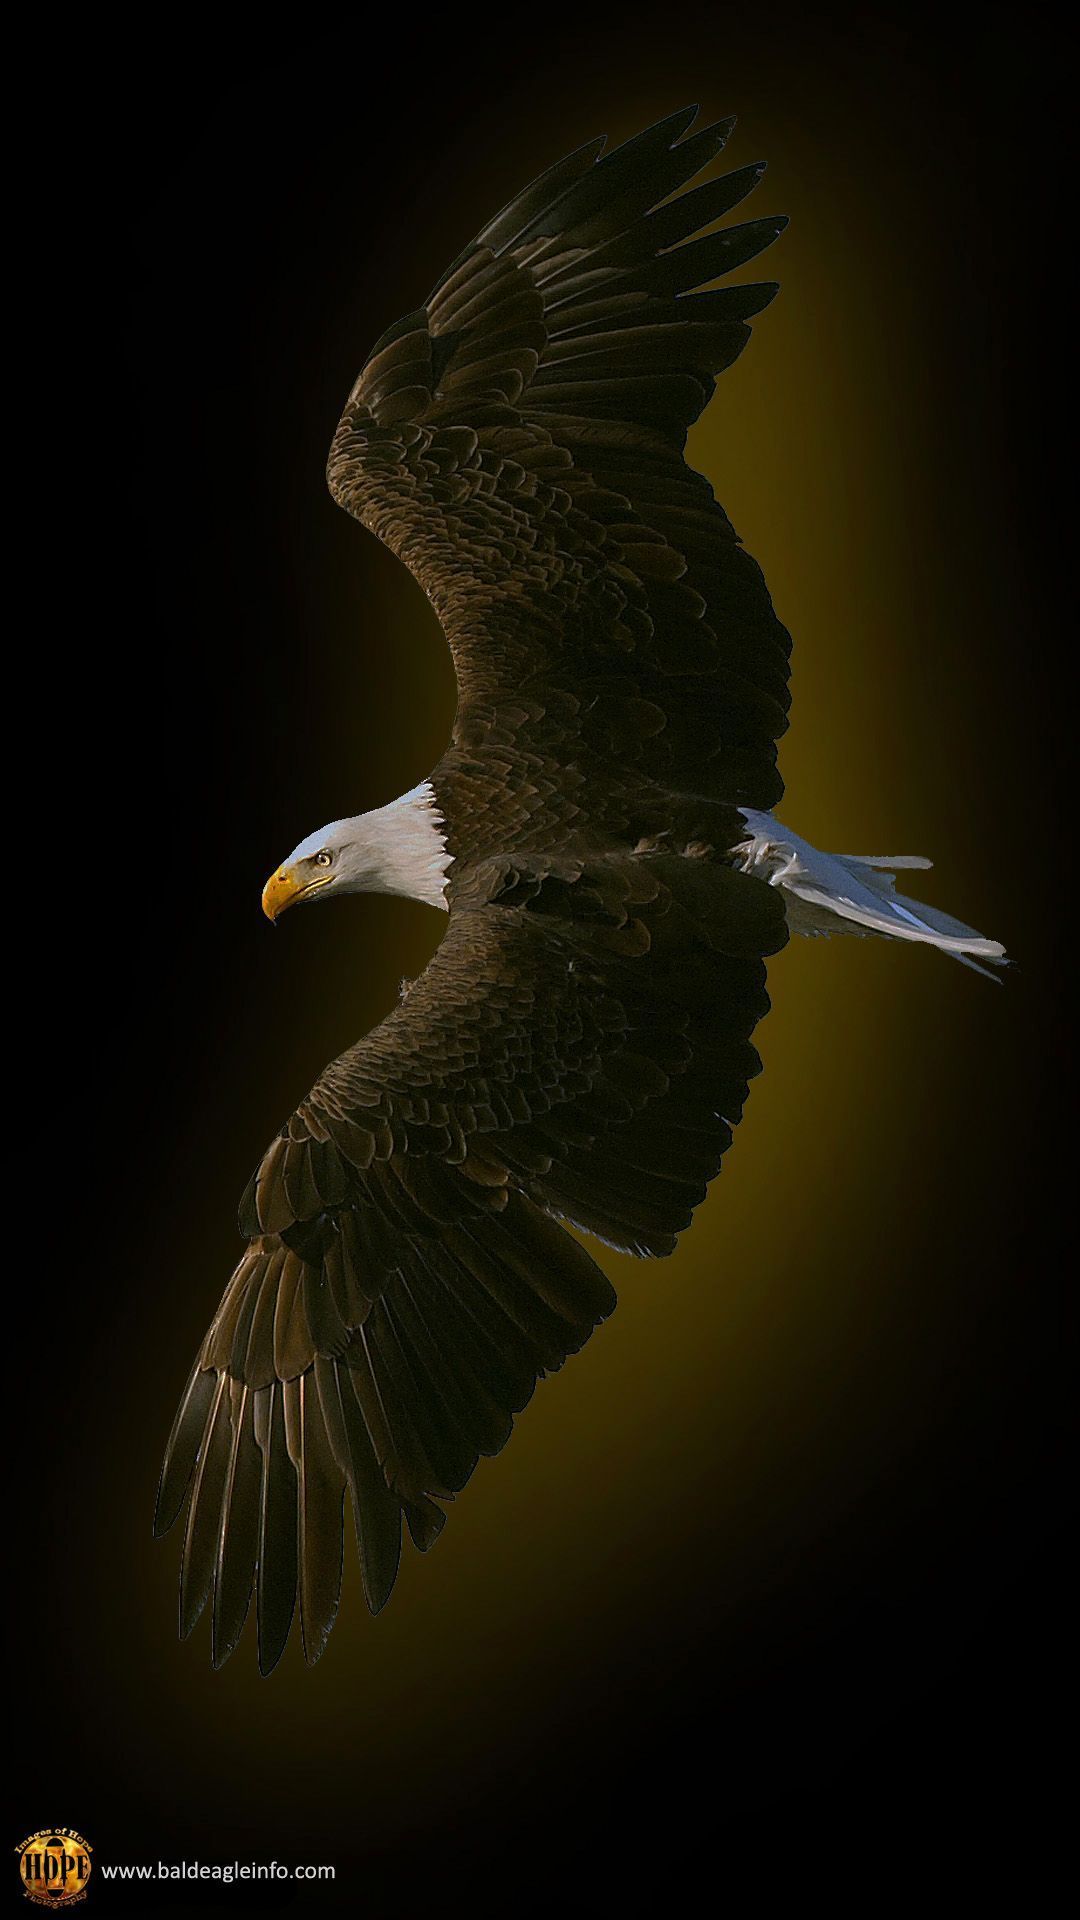 Wallpapers Of Eagle posted by Samantha Sellers